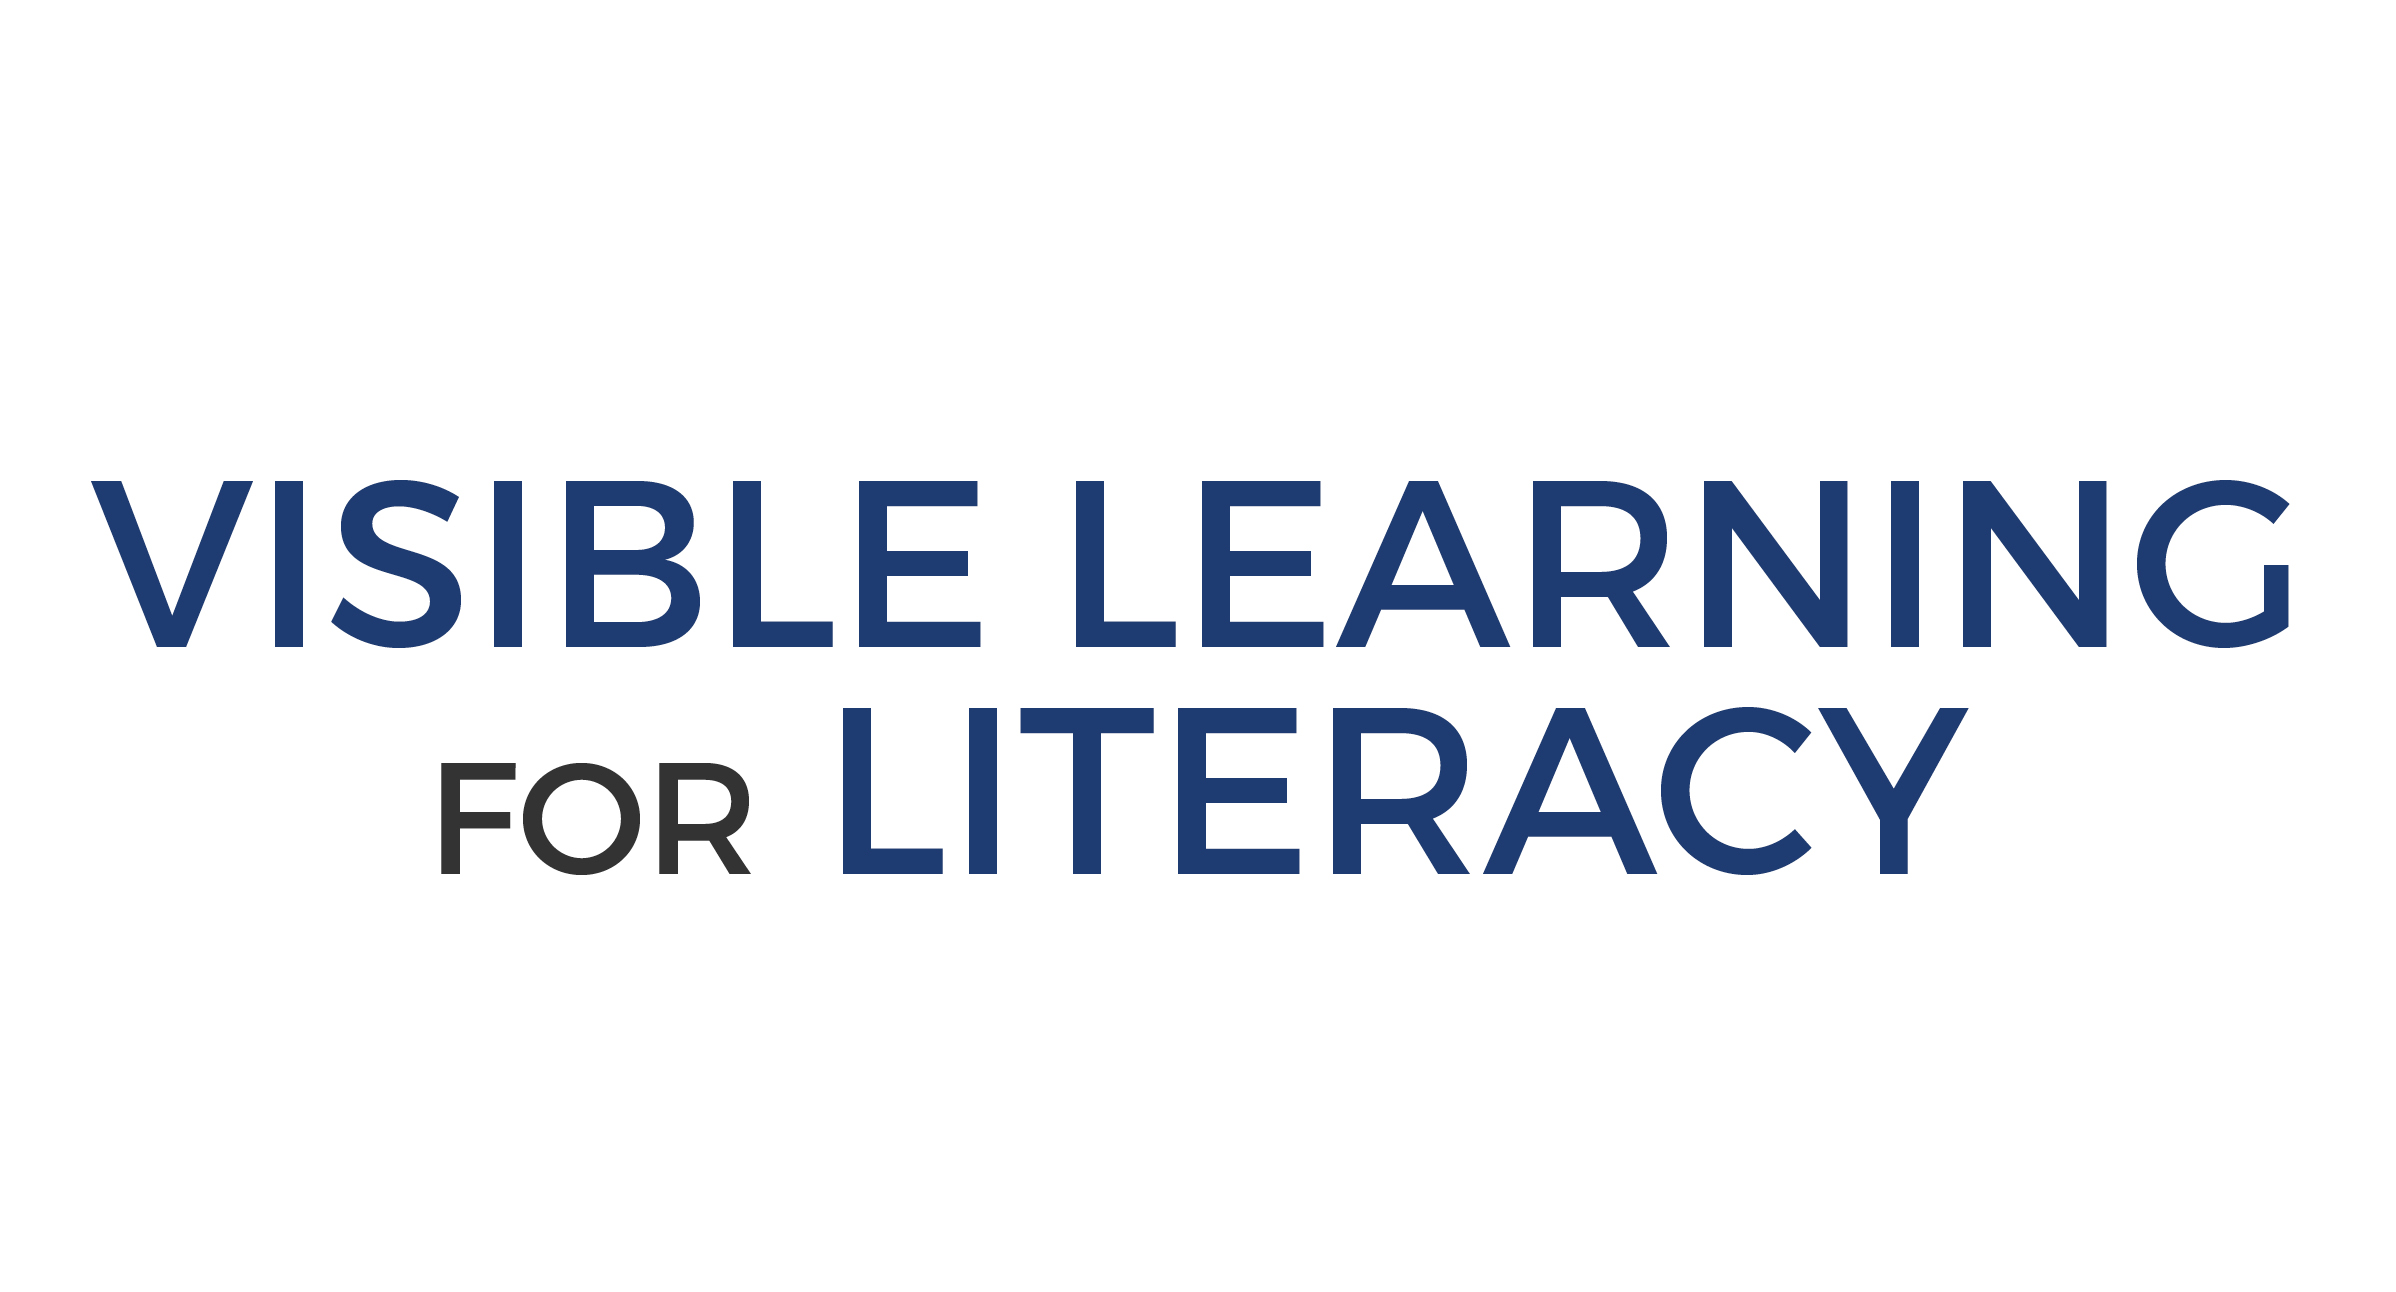 VISIBLE LEARNING FOR LITERACY: Brisbane